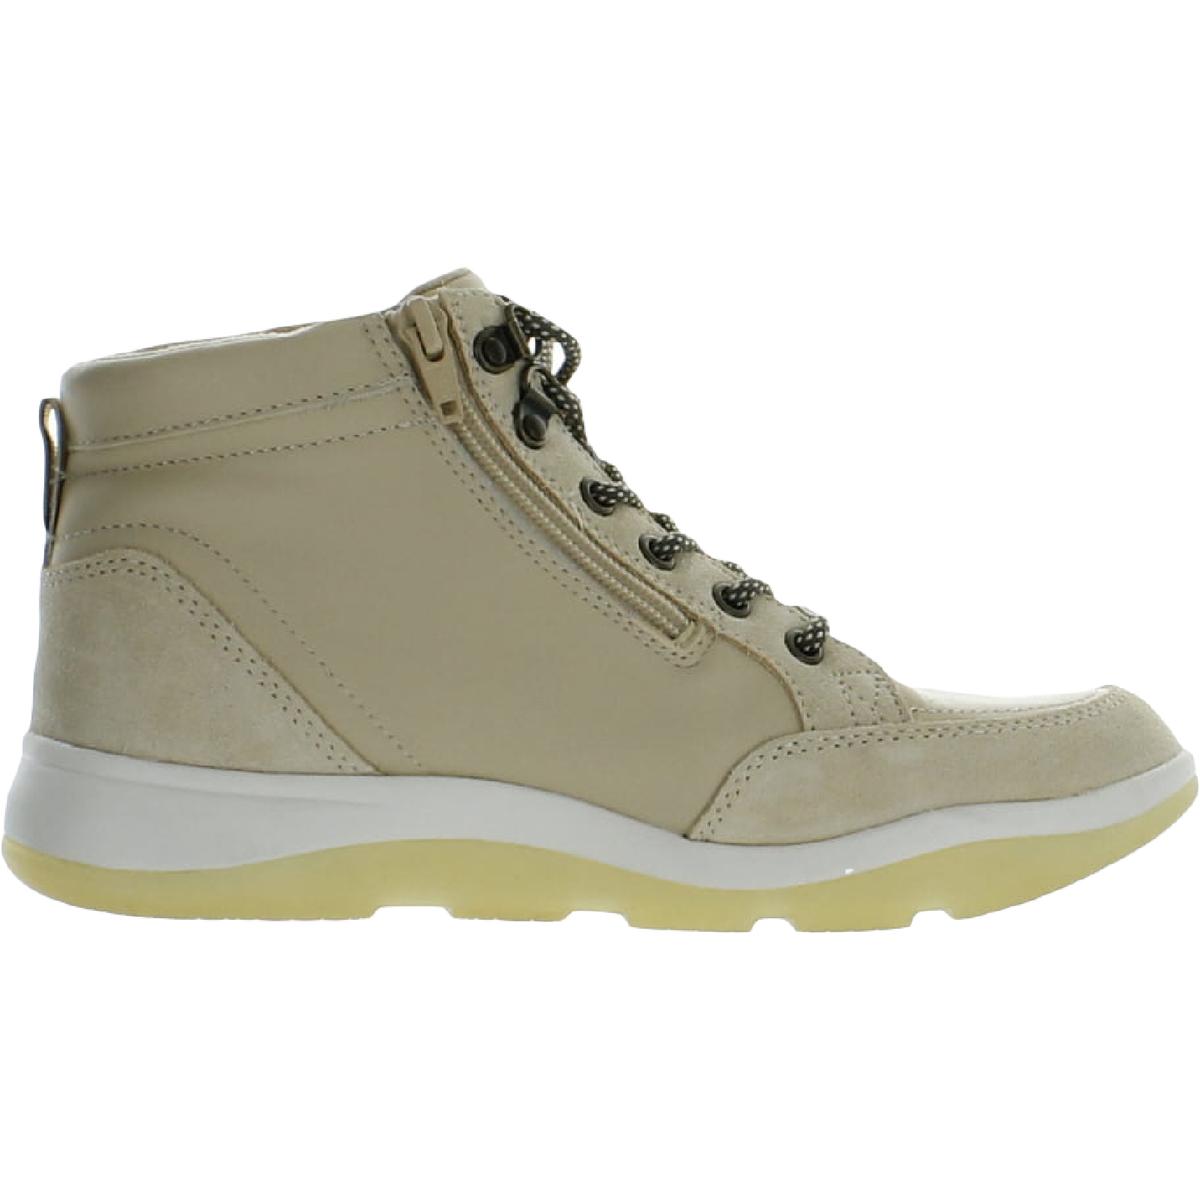 Vionic Womens Whitley Leather Sneaker Ankle Boots Shoes BHFO 9029 | eBay